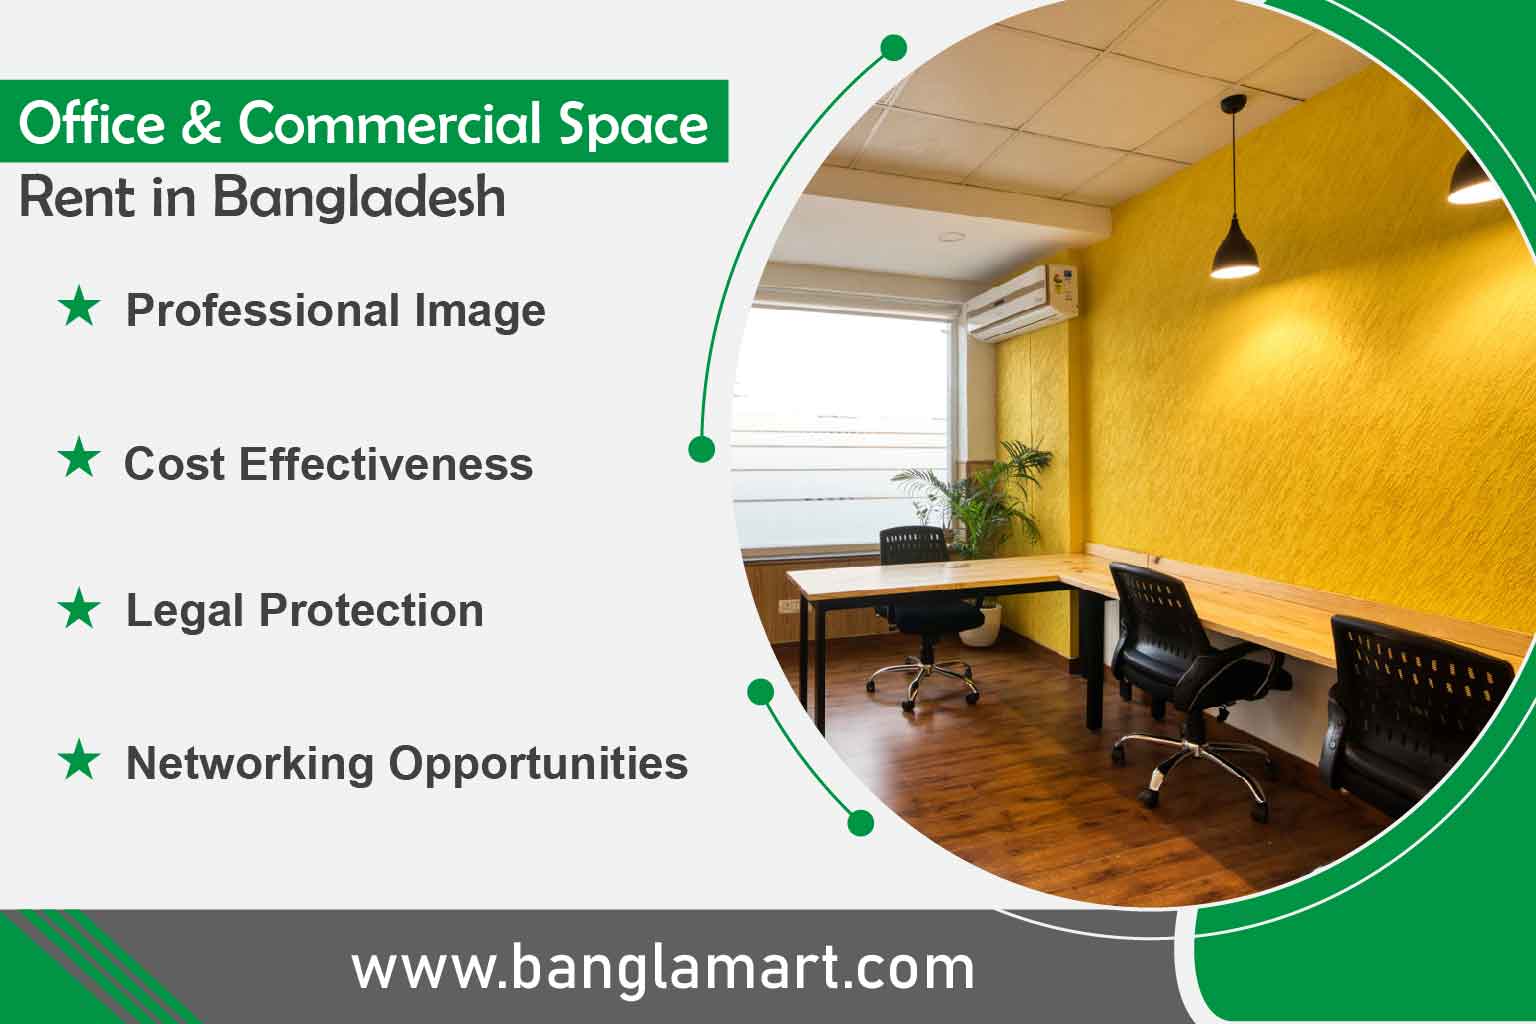 Office & Commercial Space Rent in Bangladesh